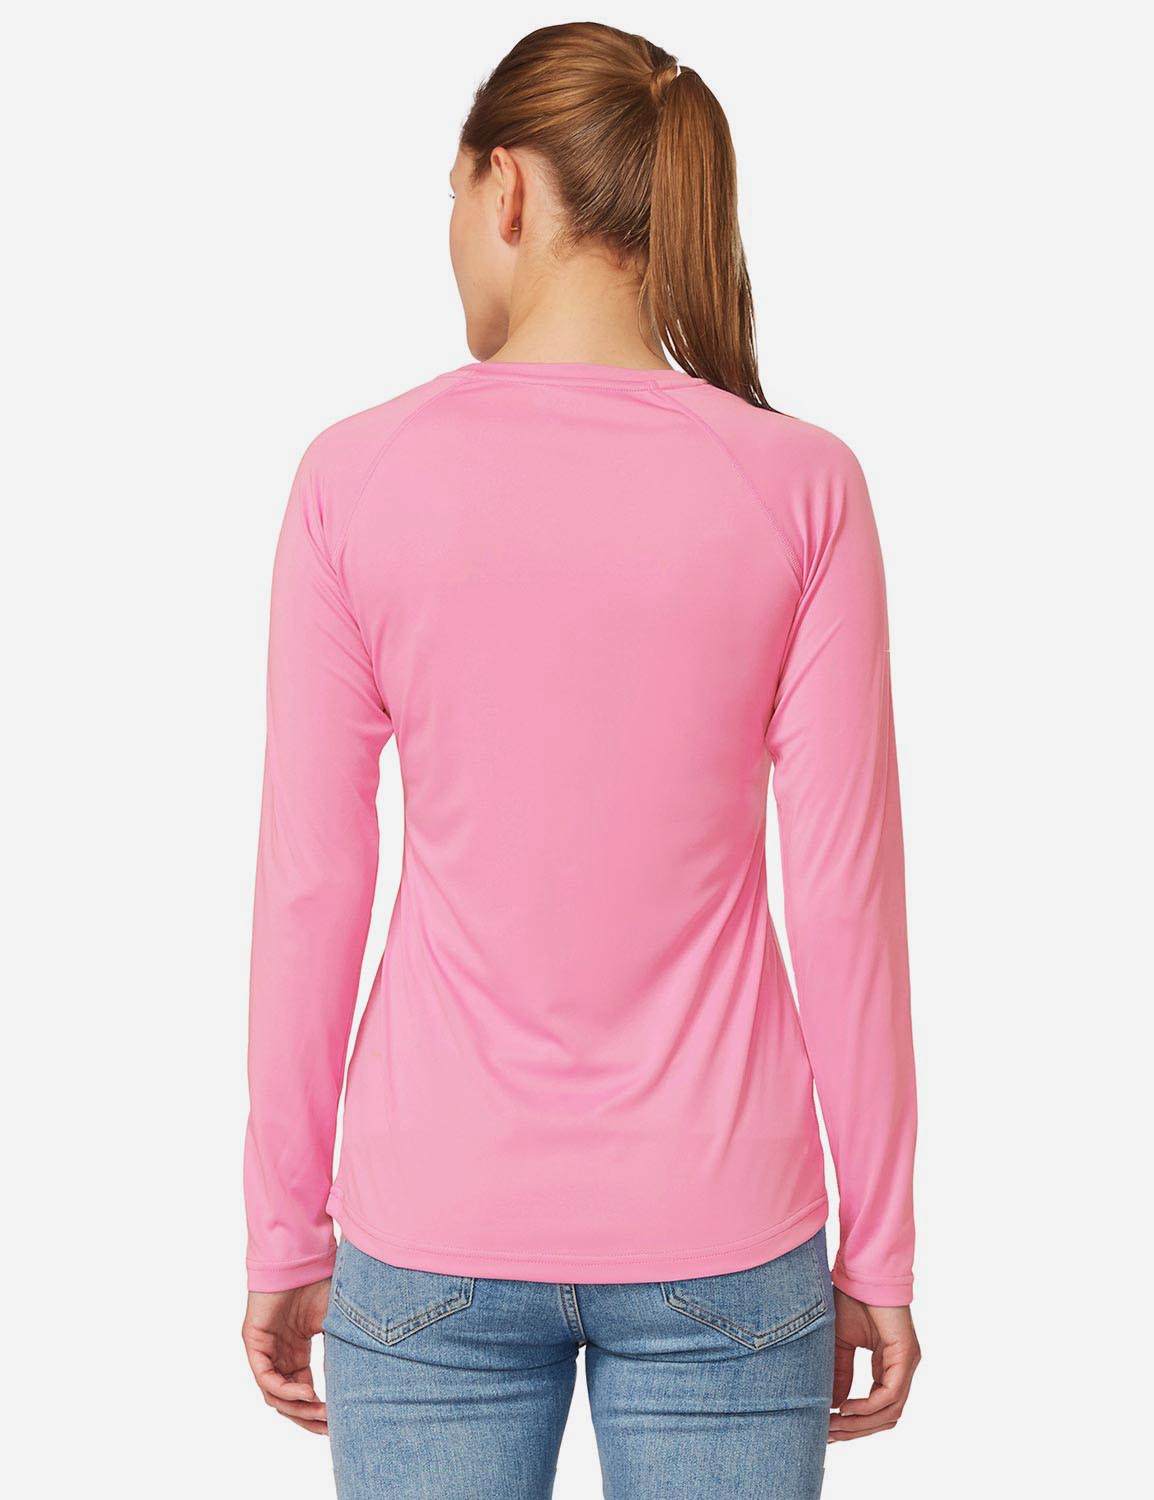 Baleaf Women's UPF50+ Loose Fit Crew Neck Casual Long Sleeved Shirt aga001 Peach Pink Back